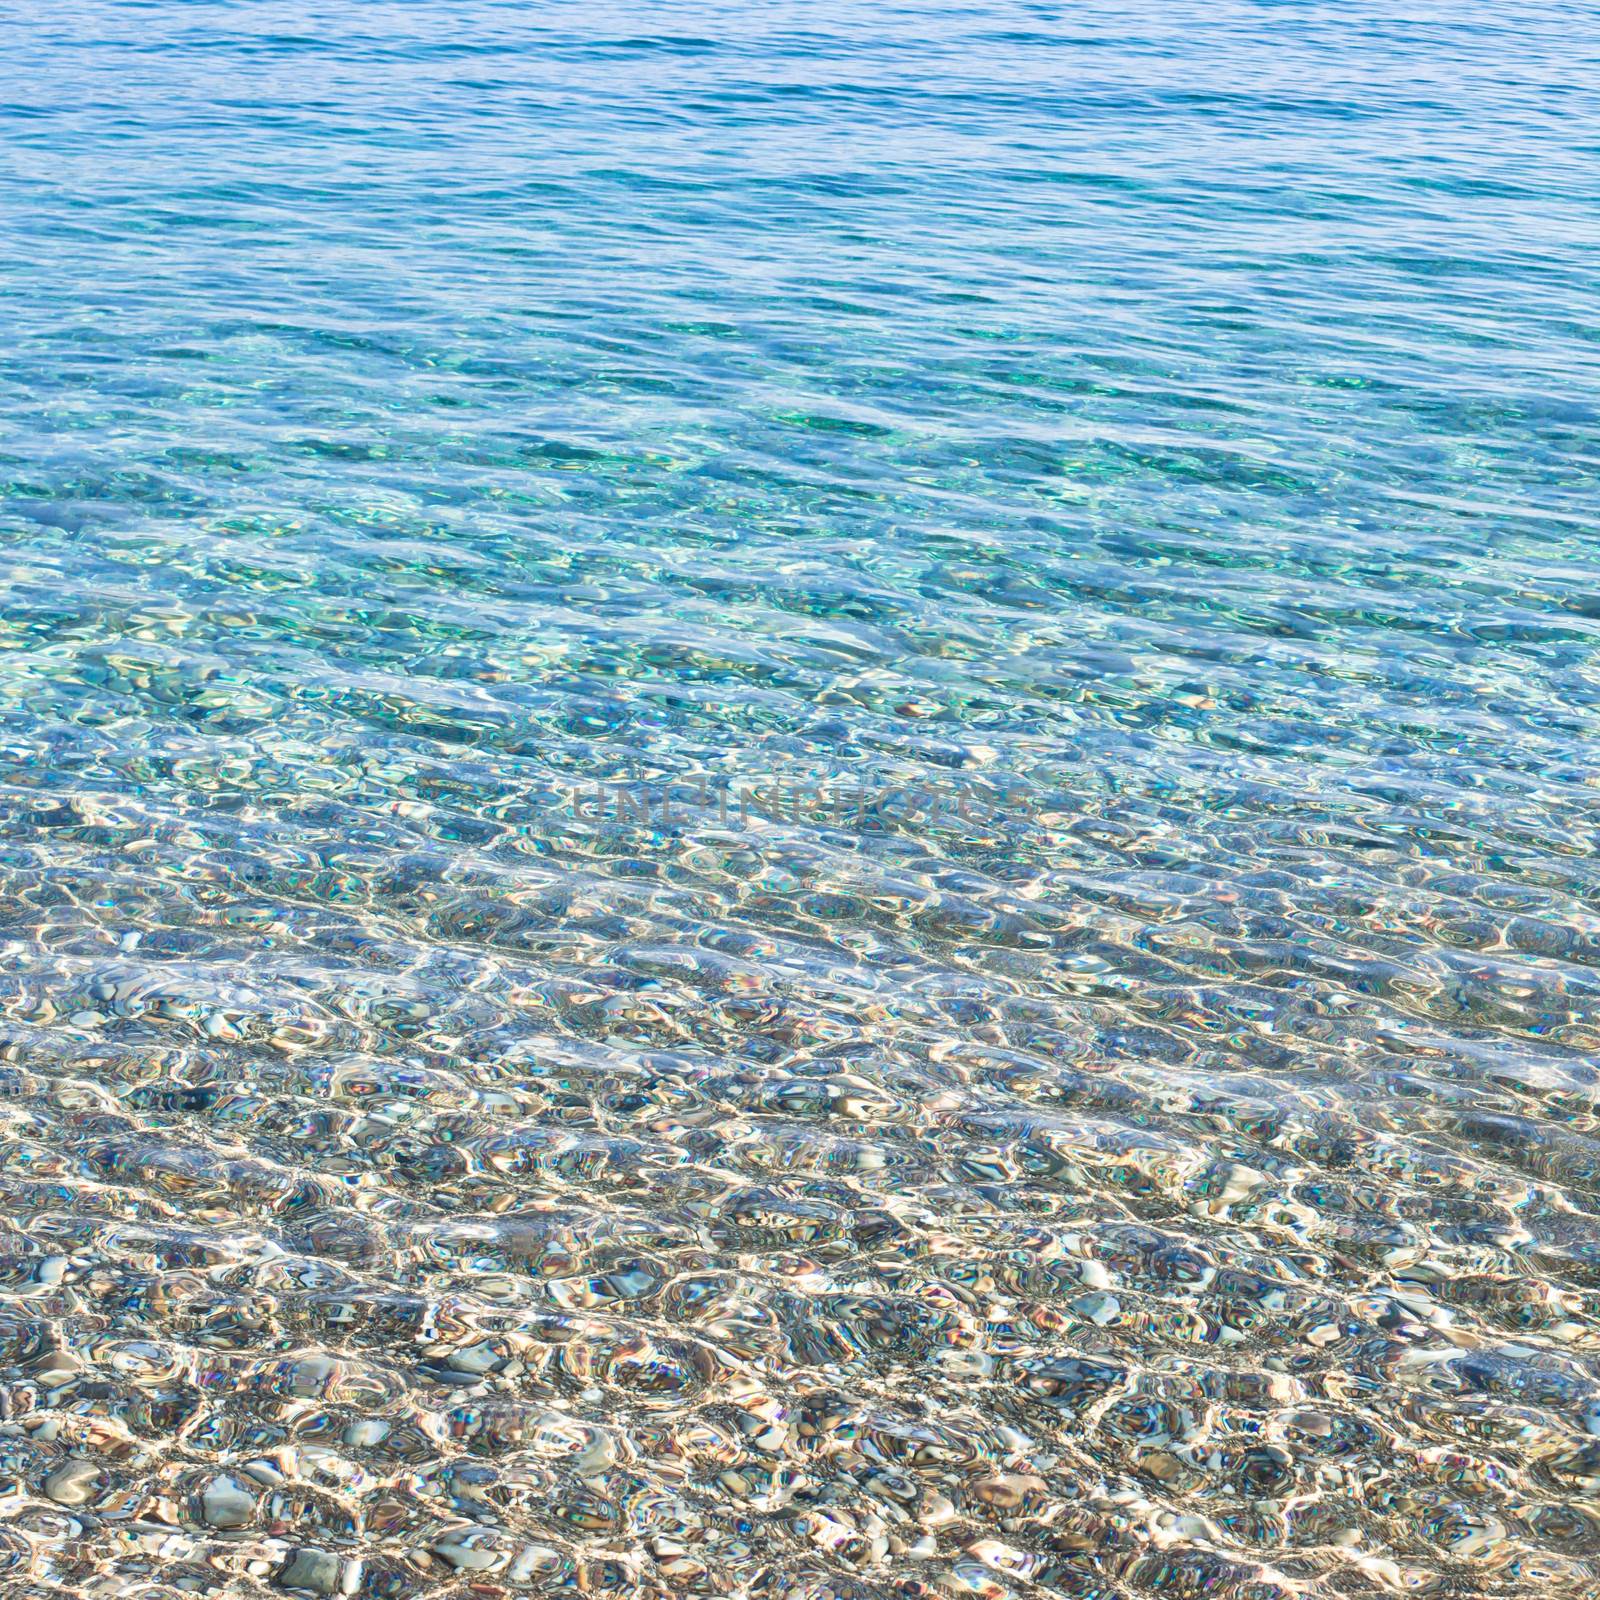 Clear sea water and pebbles as a background image